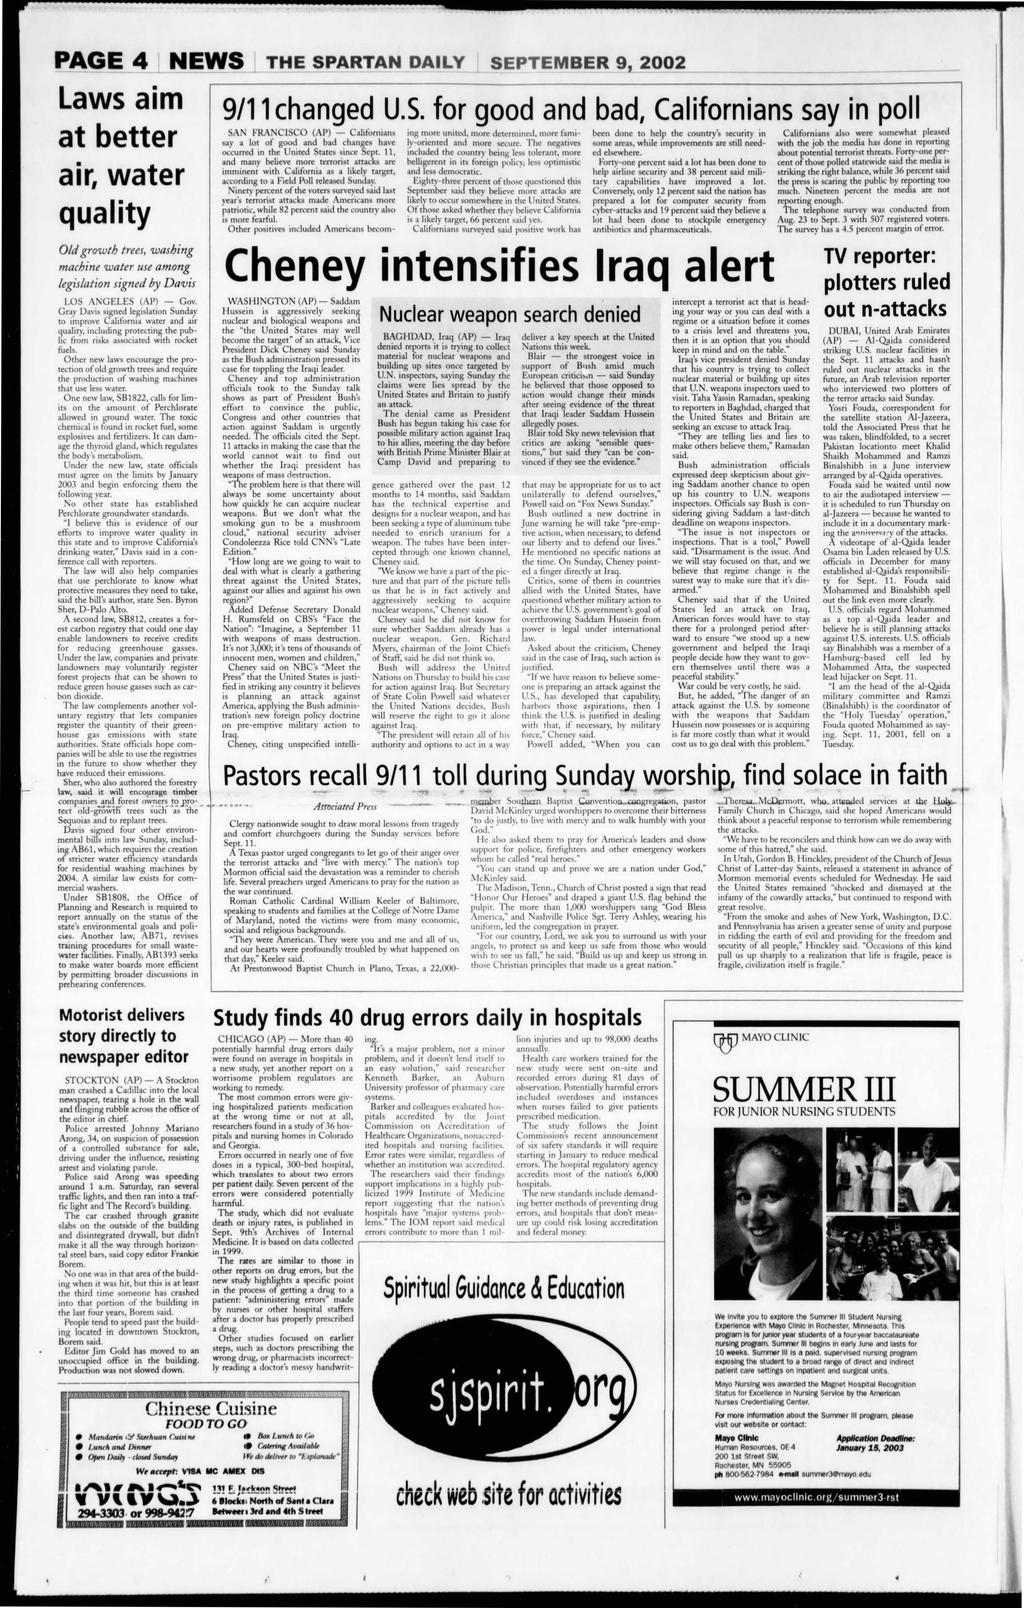 4"-- PAGE 4 NEWS SEPTEMBER 9 2002 Laws aim 79/changed U.S. fo good bad, Califonians say in poll at bette ai, wate quality SAN FRANCISCO (AP) Califonians say a lot of good bad changes have occued in the United States since Sept.